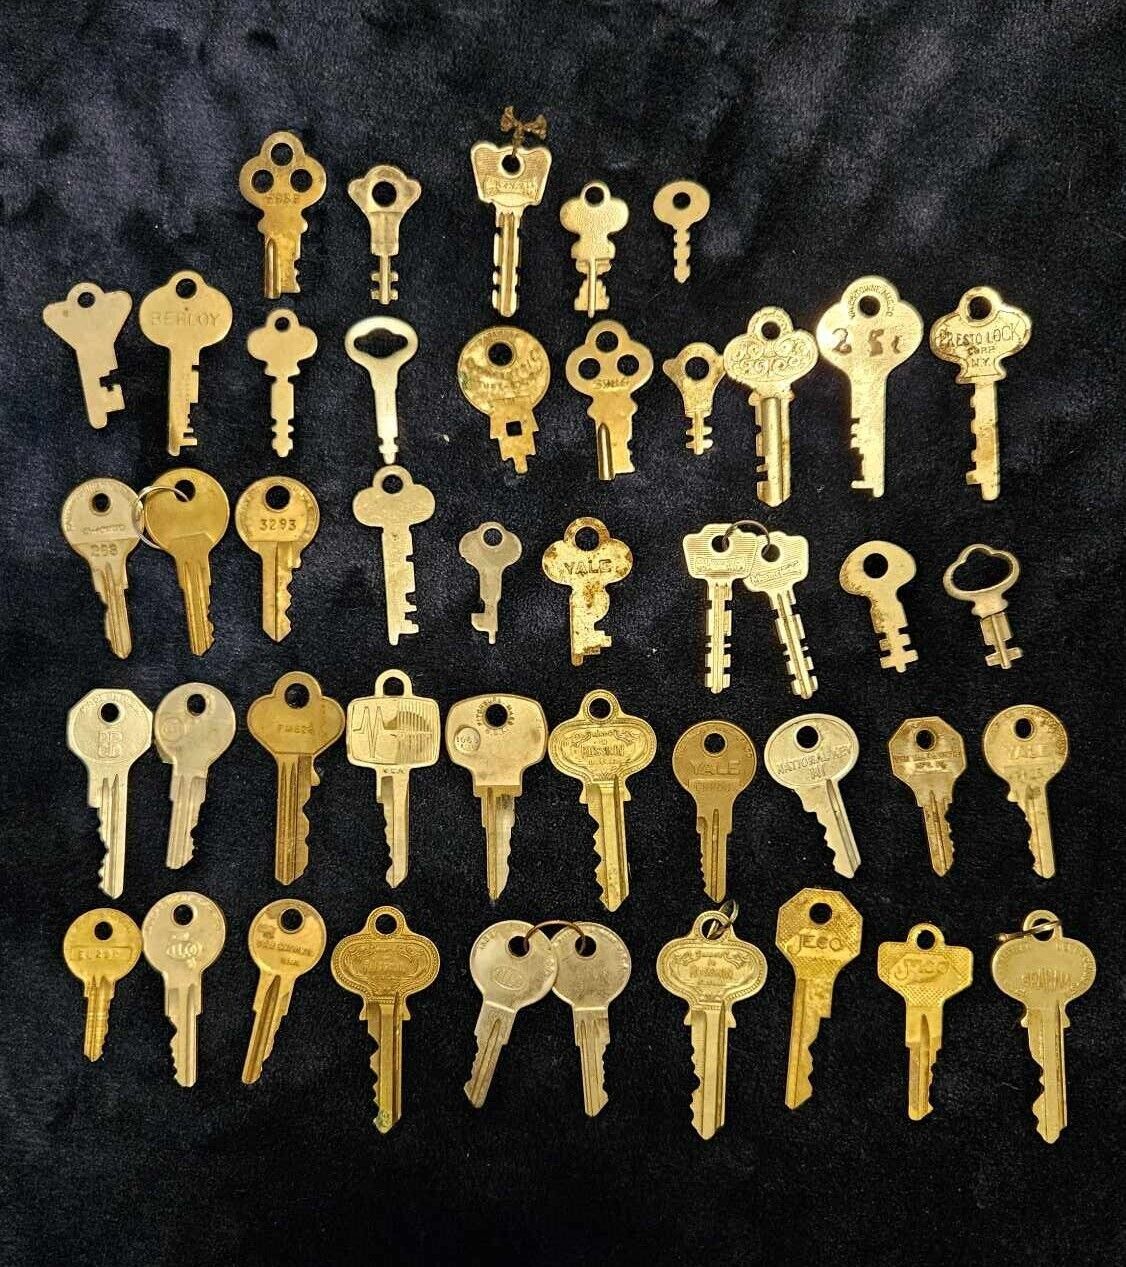 Lot Of ~45 Vintage Random Keys Arts & Crafts / Authentic Old As Shown